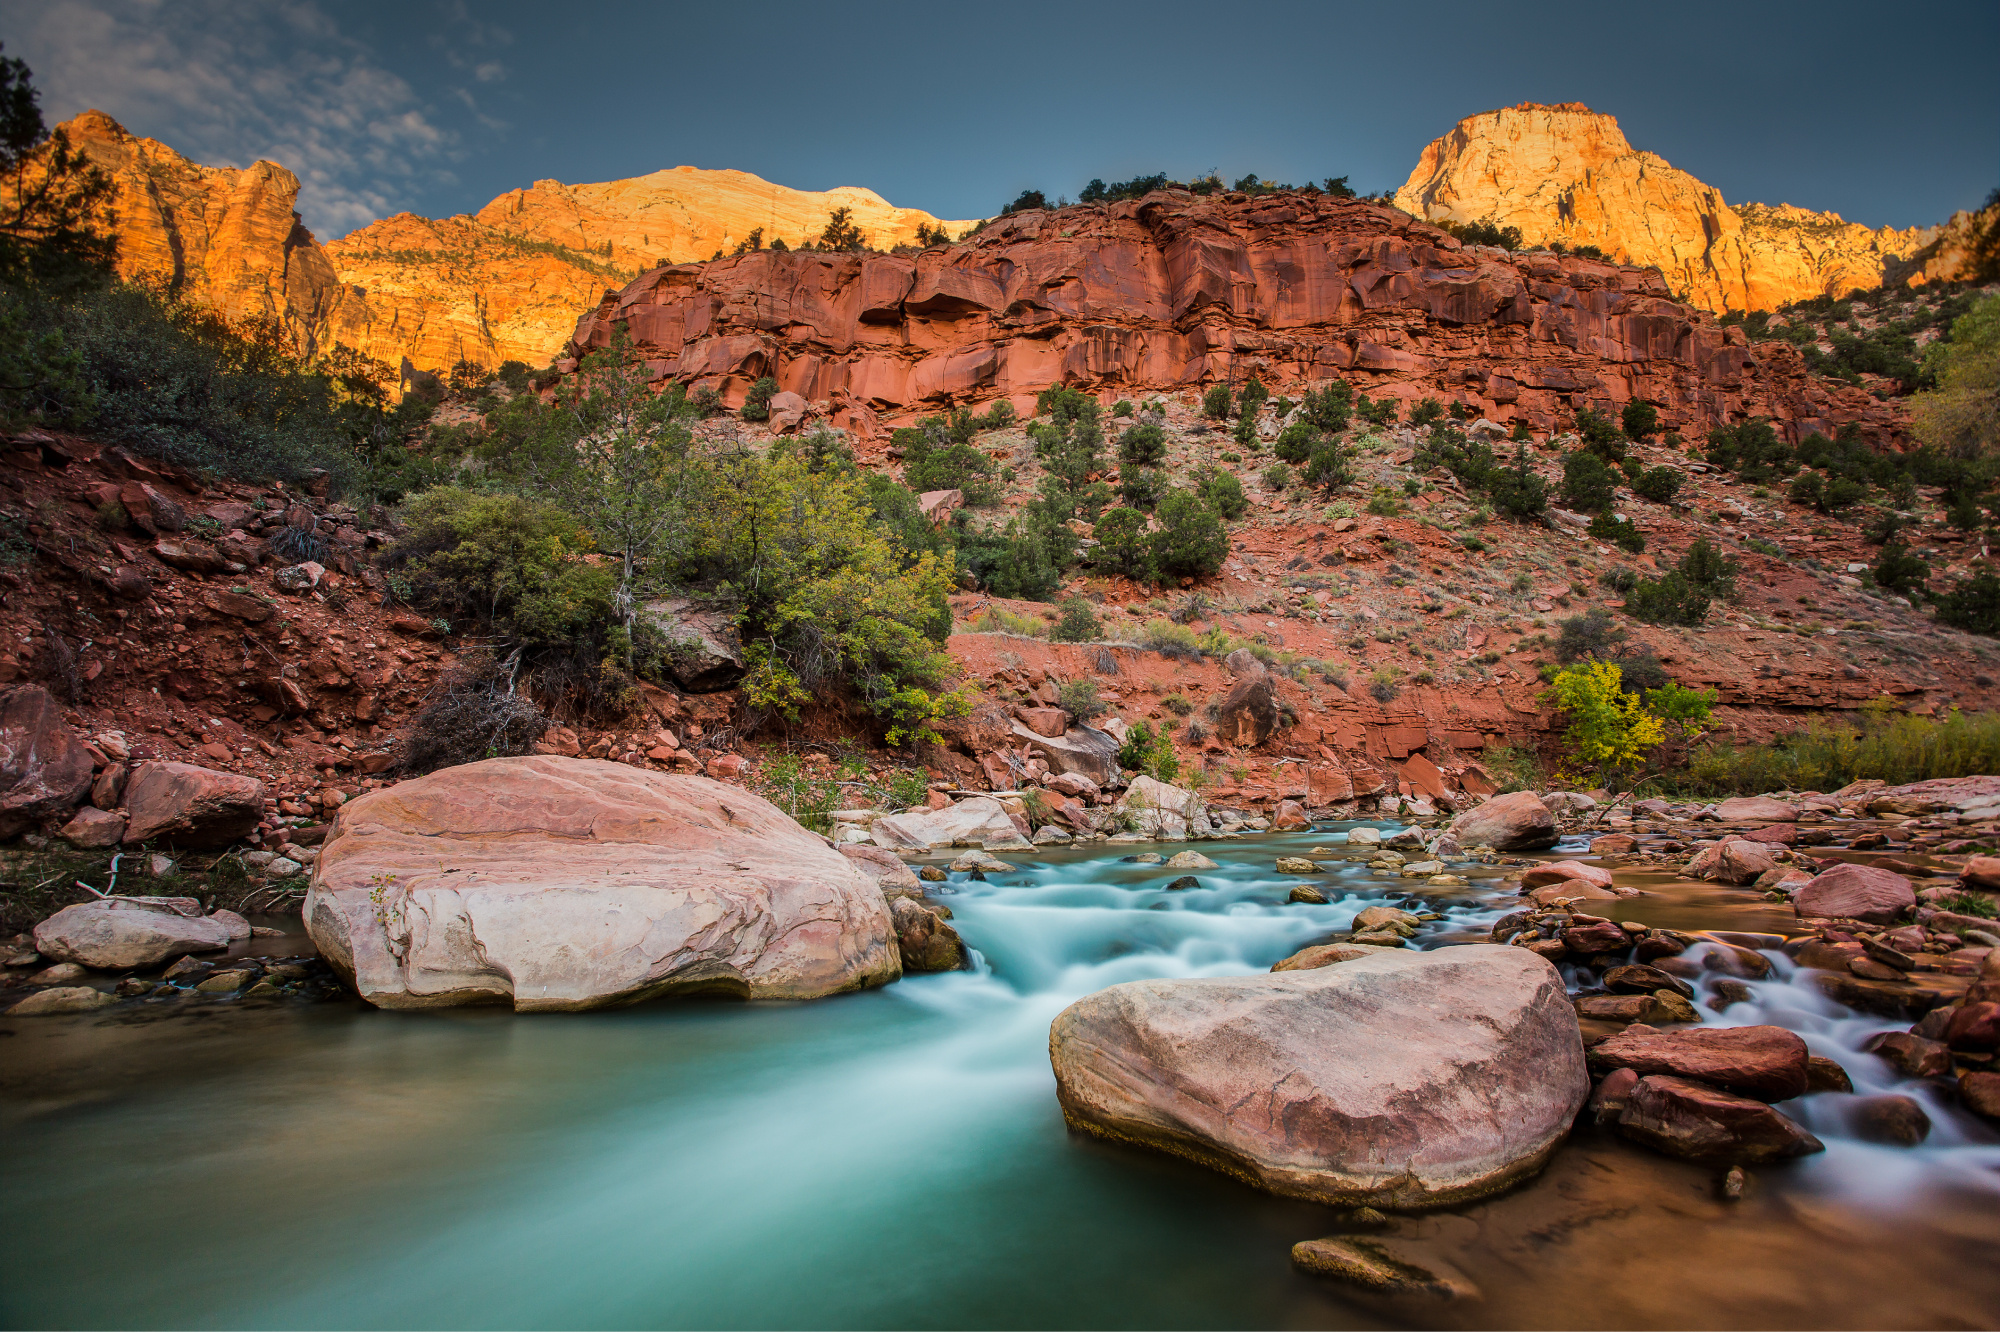 HDR Photography Workshop: Zion River HDR | Pt.1 | Location